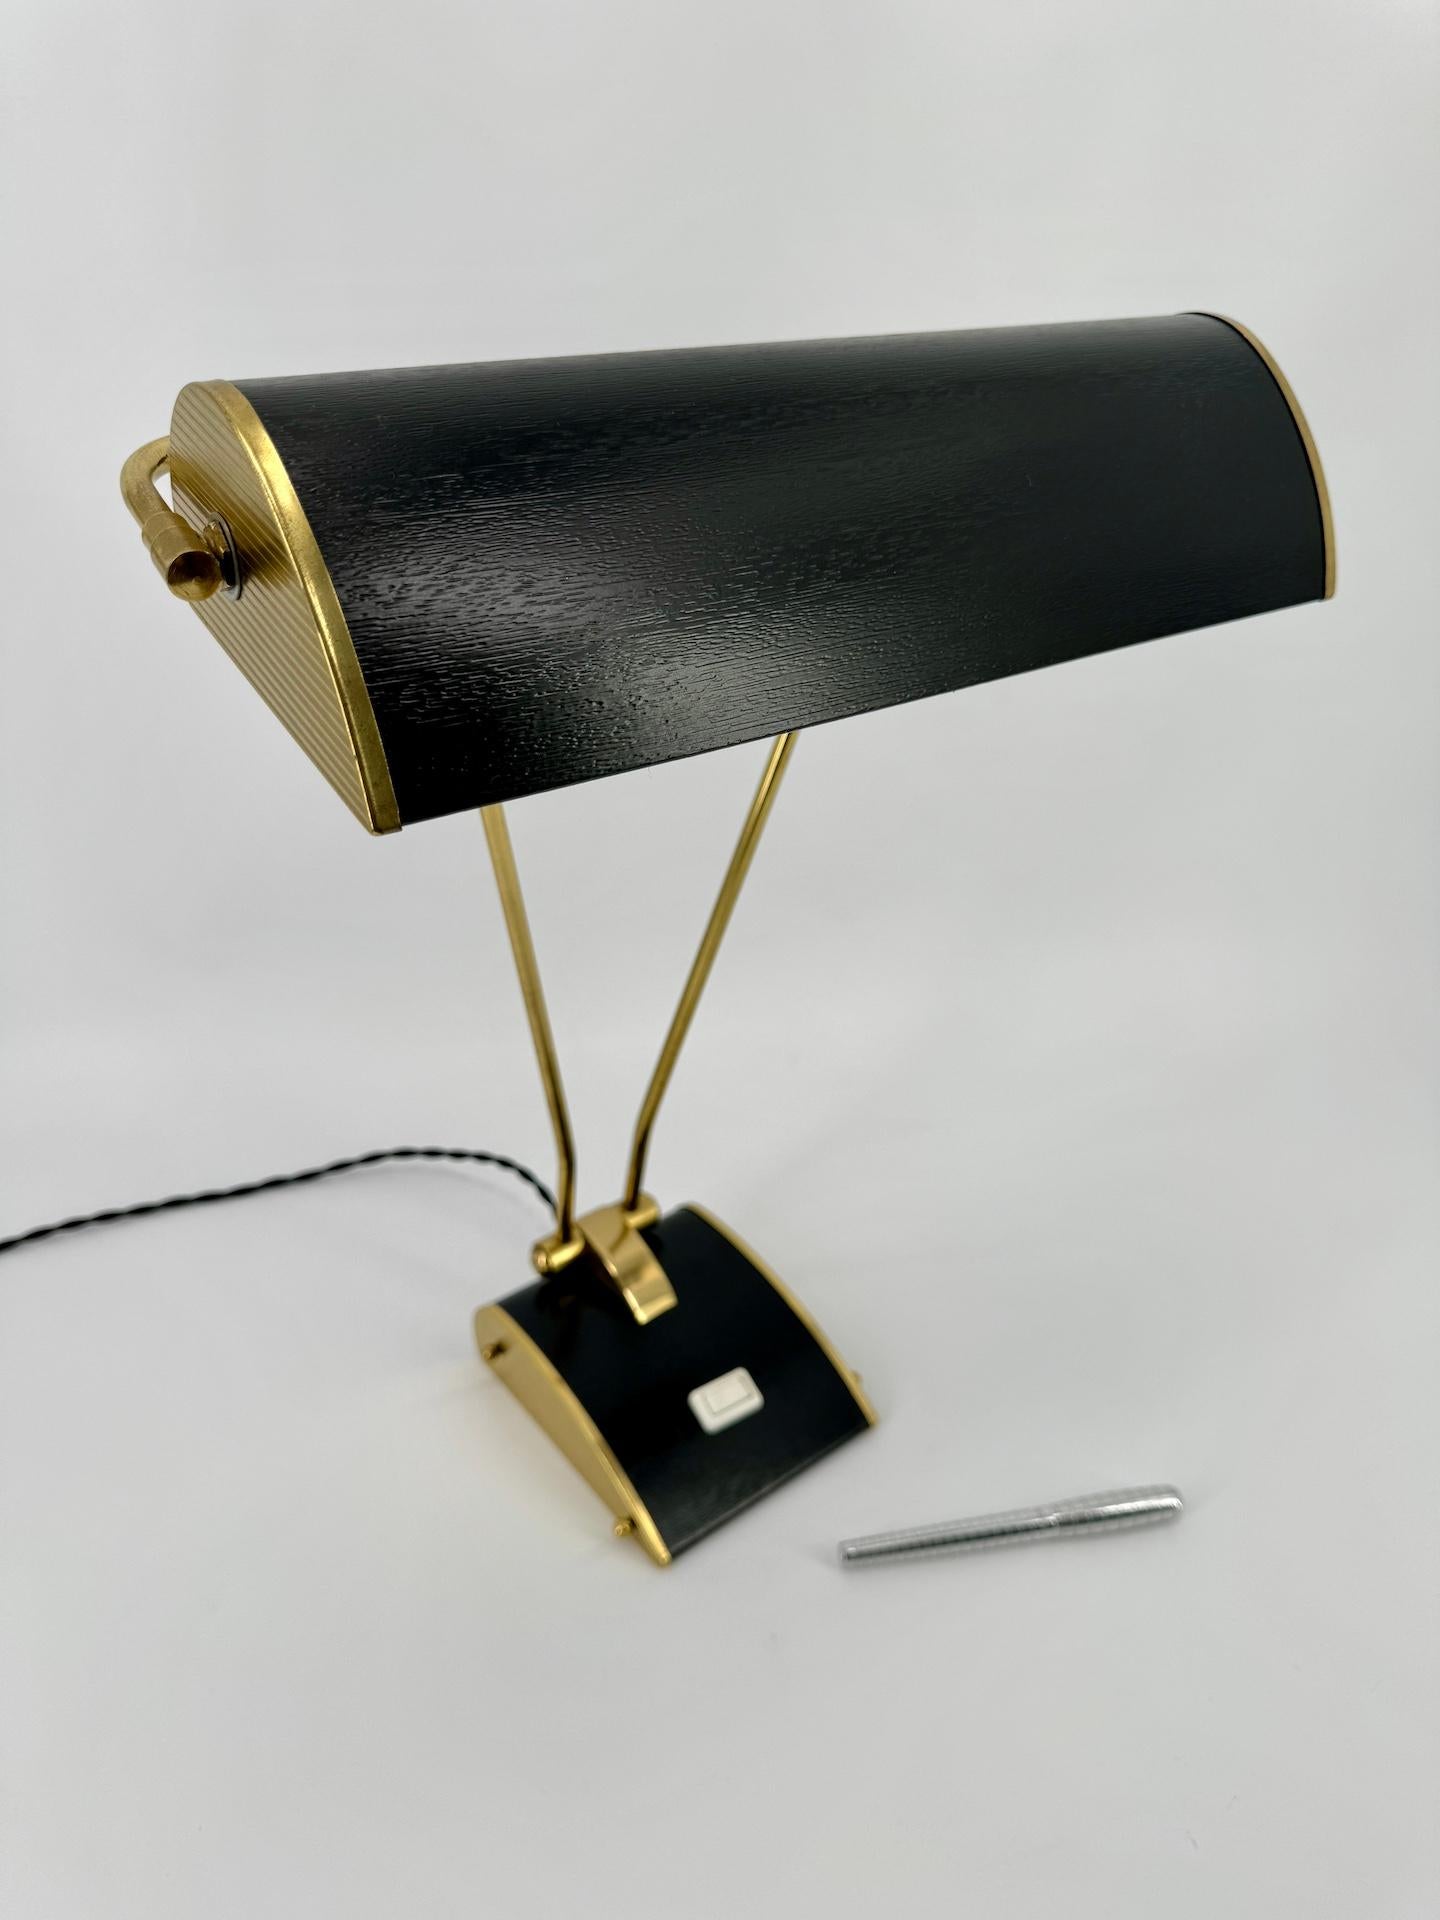 Mid-20th Century Art Deco Style Table Lamp by JUMO in Black And Brass Finish France Circa 1950